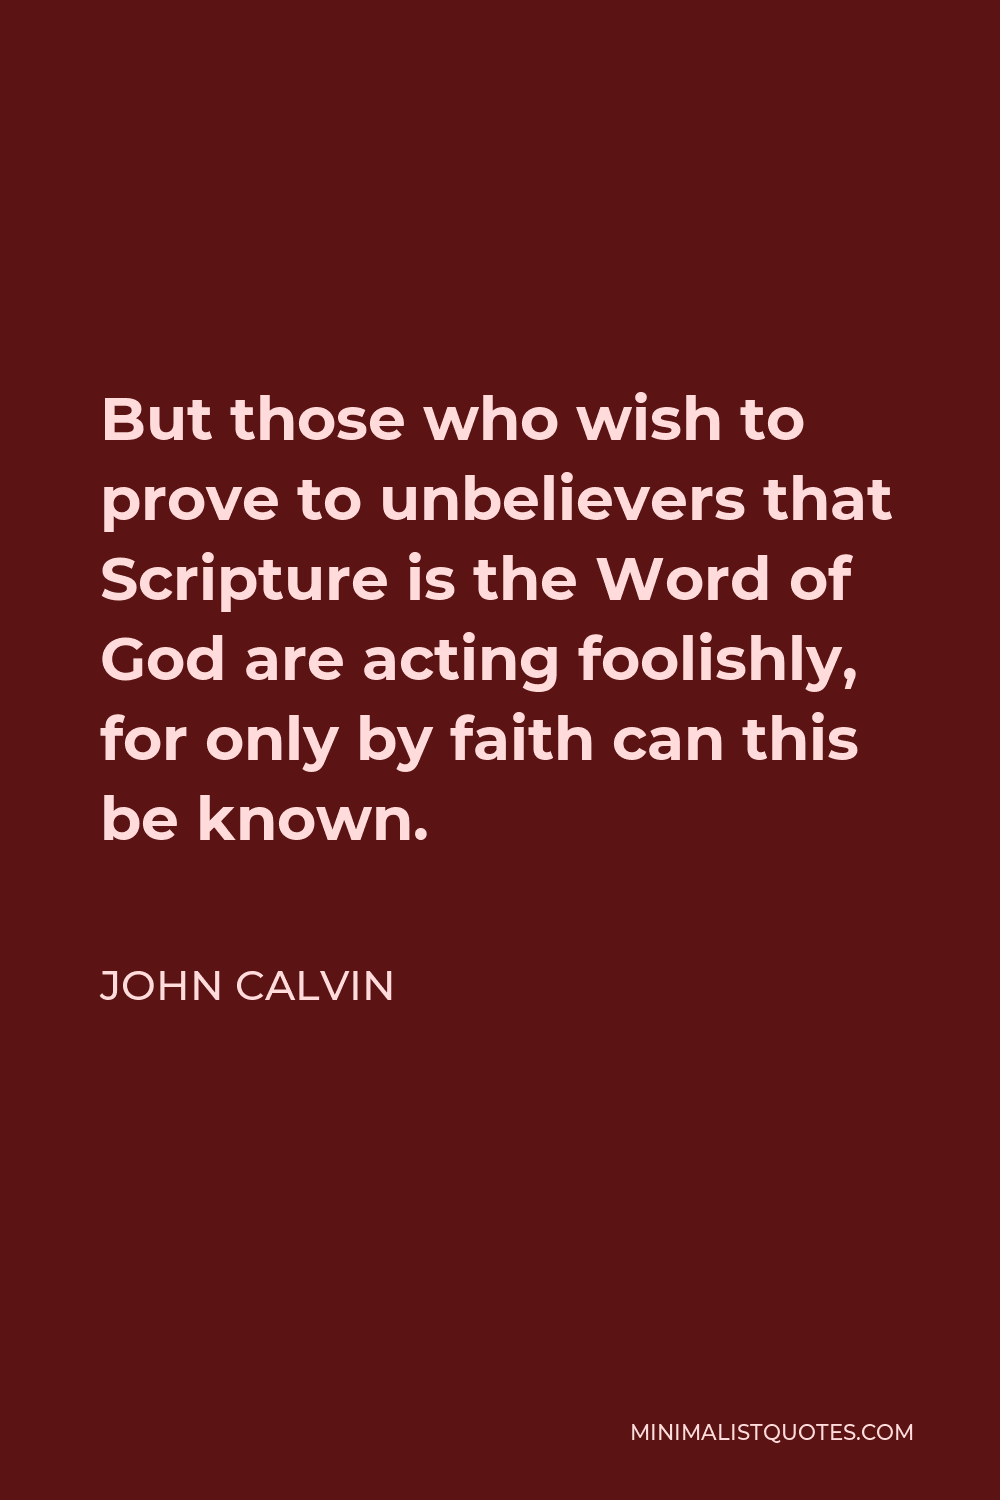 John Calvin Quote - But those who wish to prove to unbelievers that Scripture is the Word of God are acting foolishly, for only by faith can this be known.